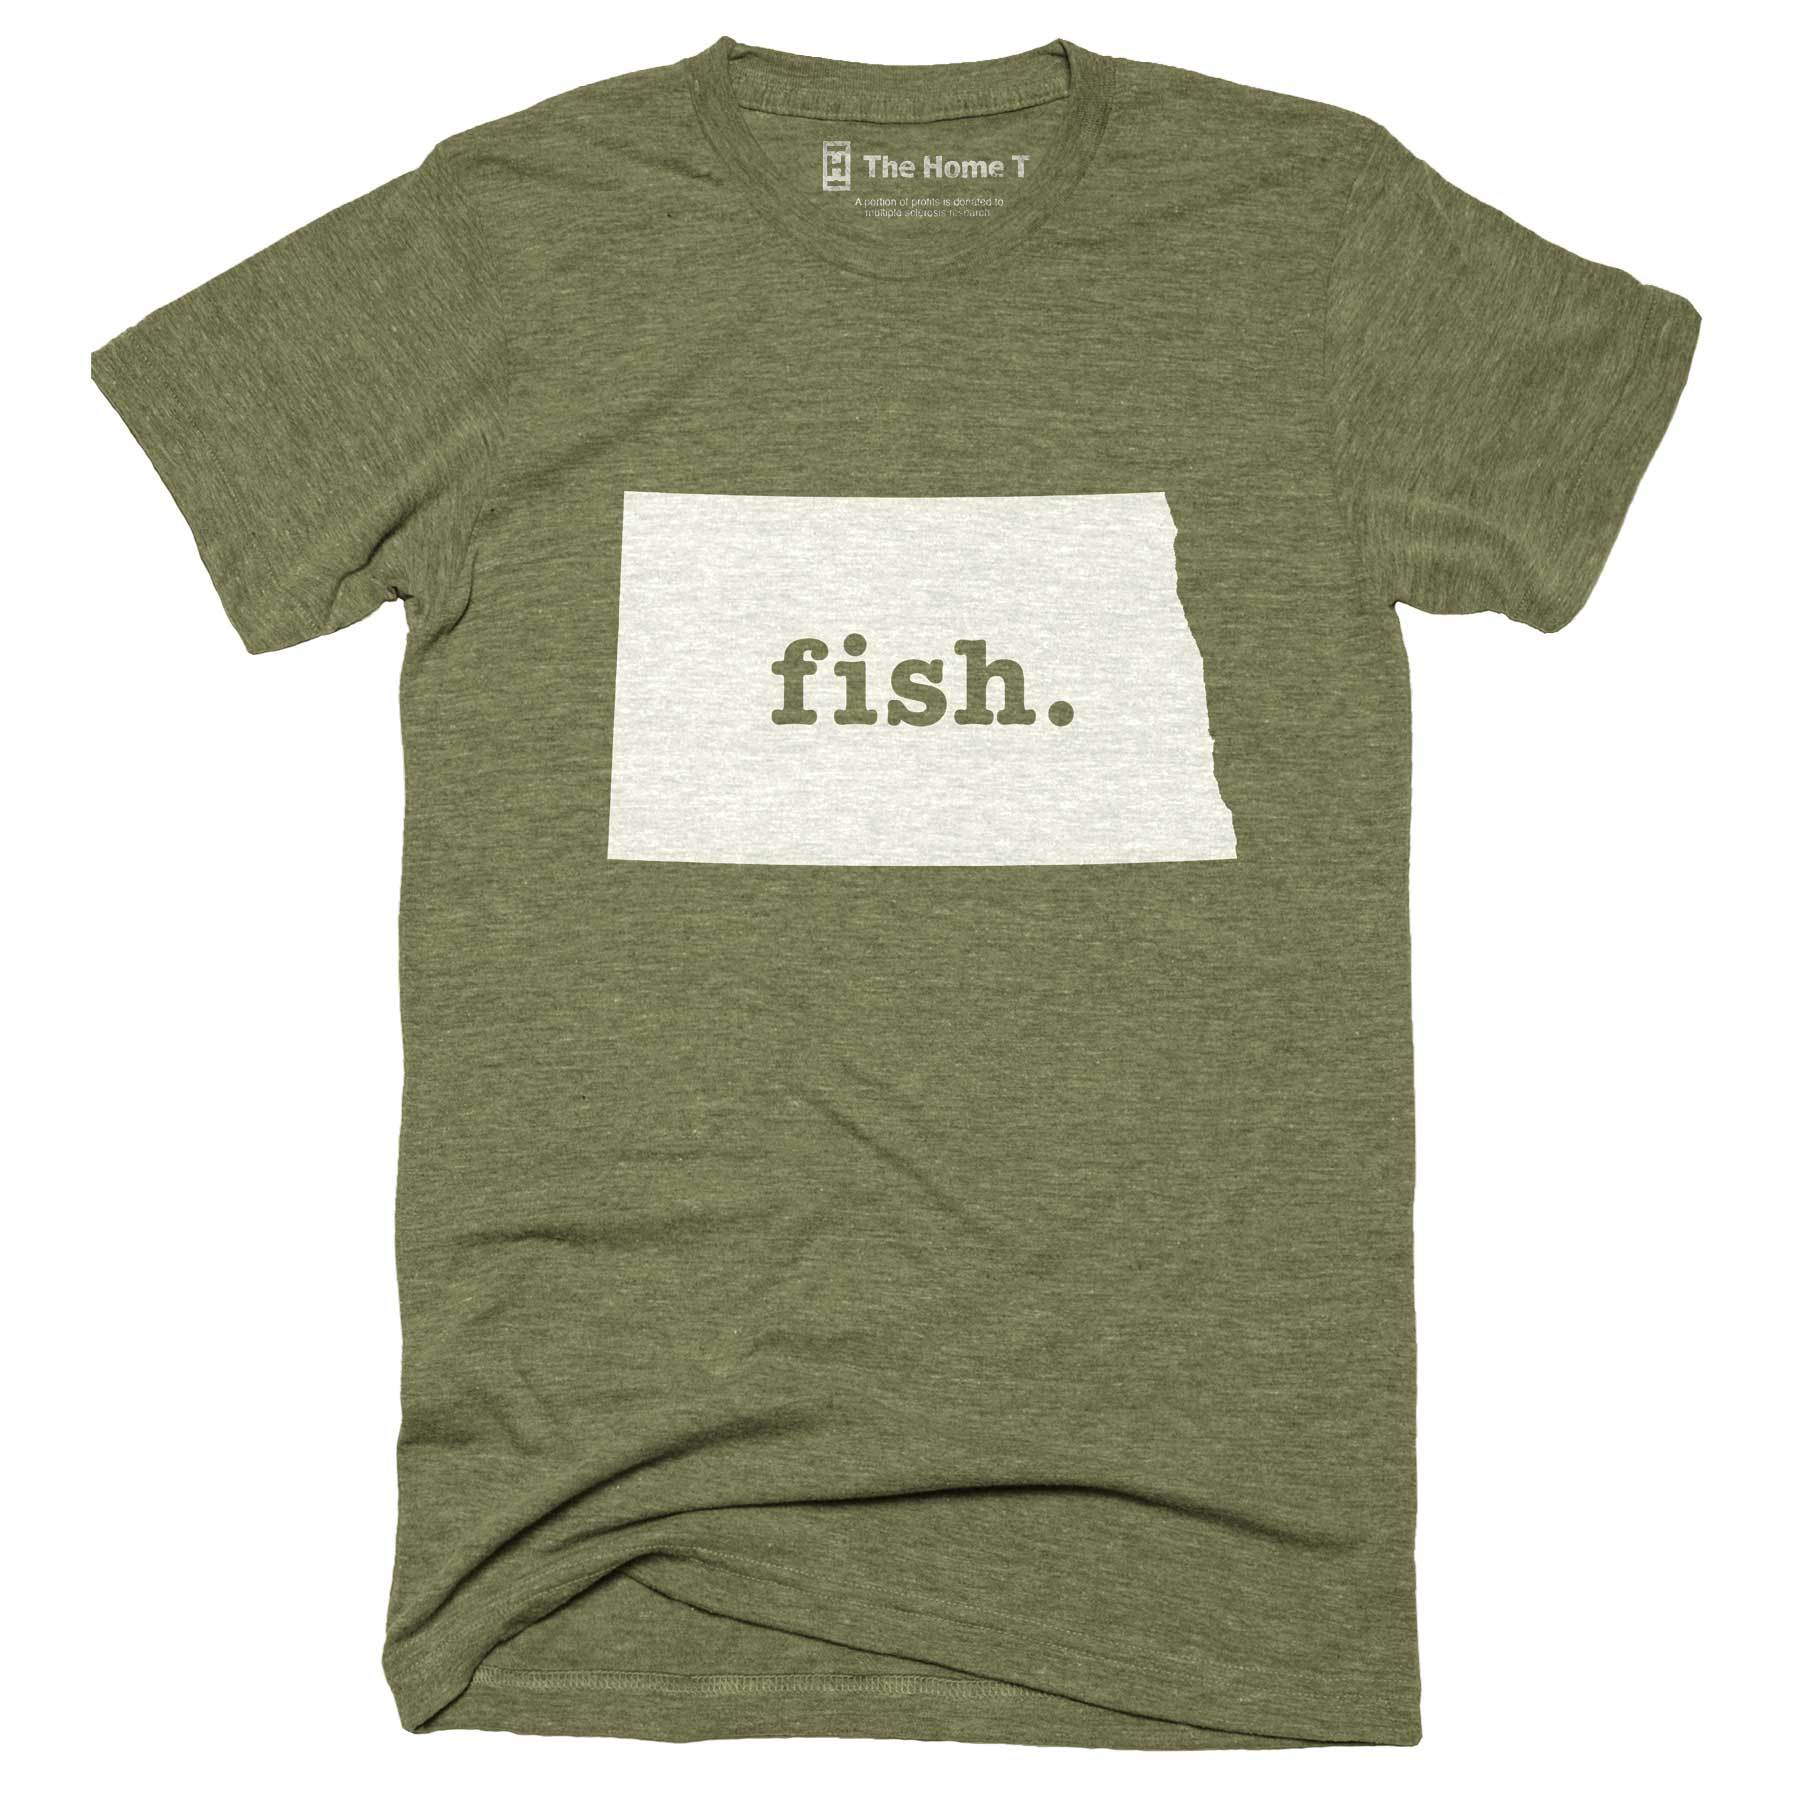 North Dakota Fish Home T-Shirt Outdoor Collection The Home T XXL Army Green